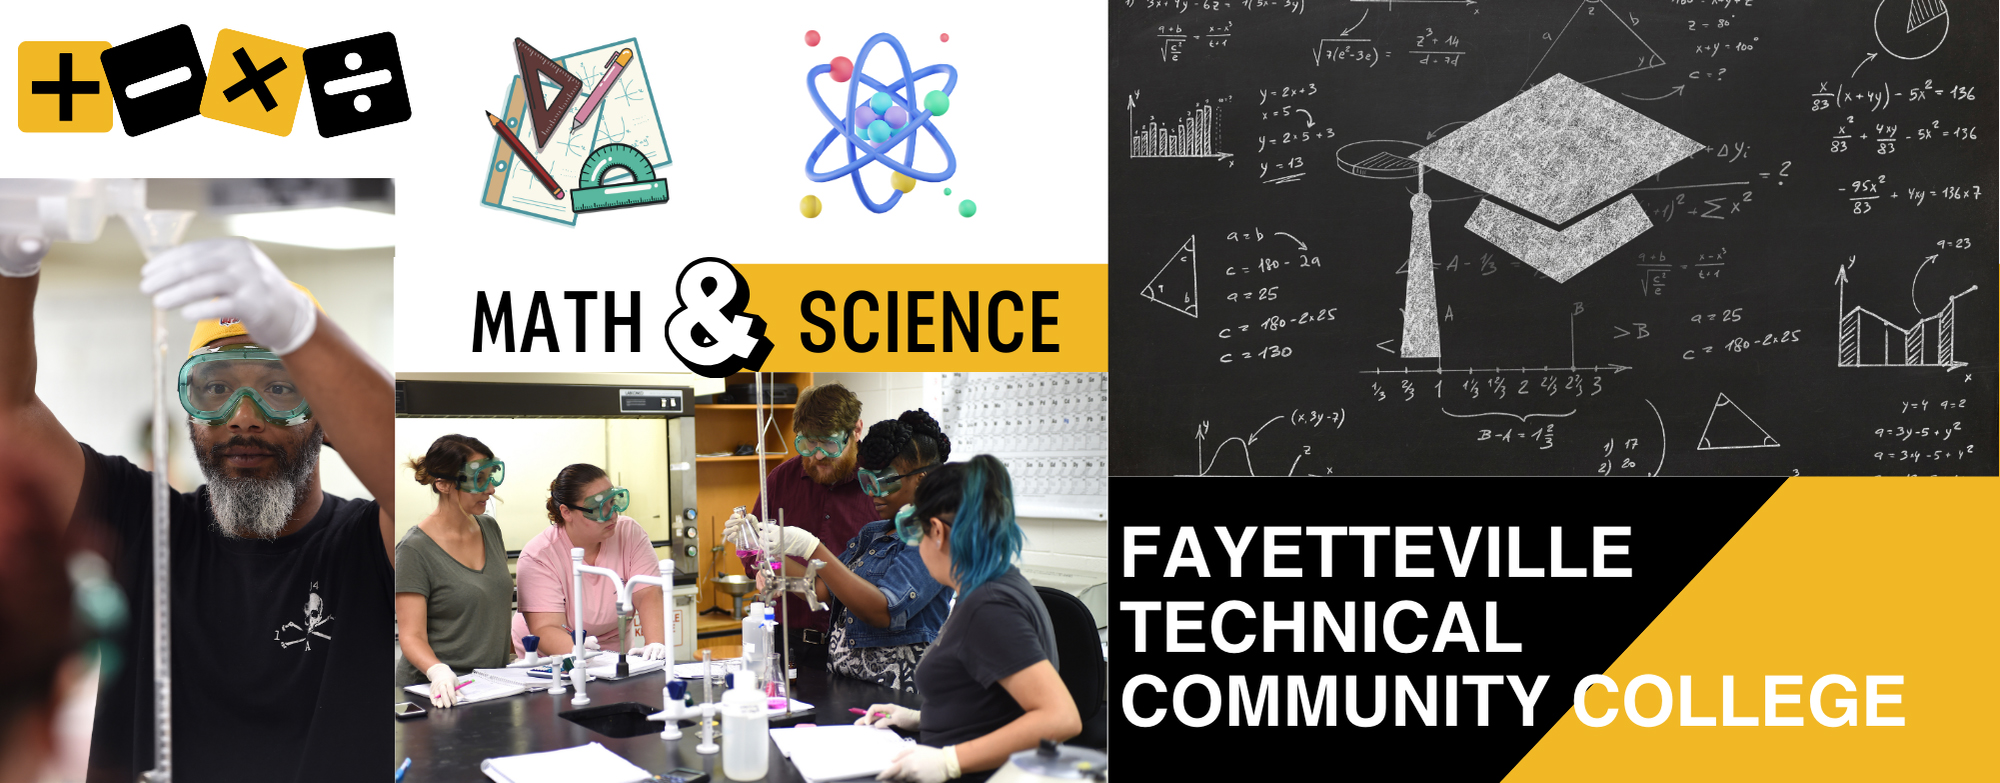 Banner for Fayetteville Technical Community College's Math & Science department, featuring students in a lab, mathematical symbols, and equations.